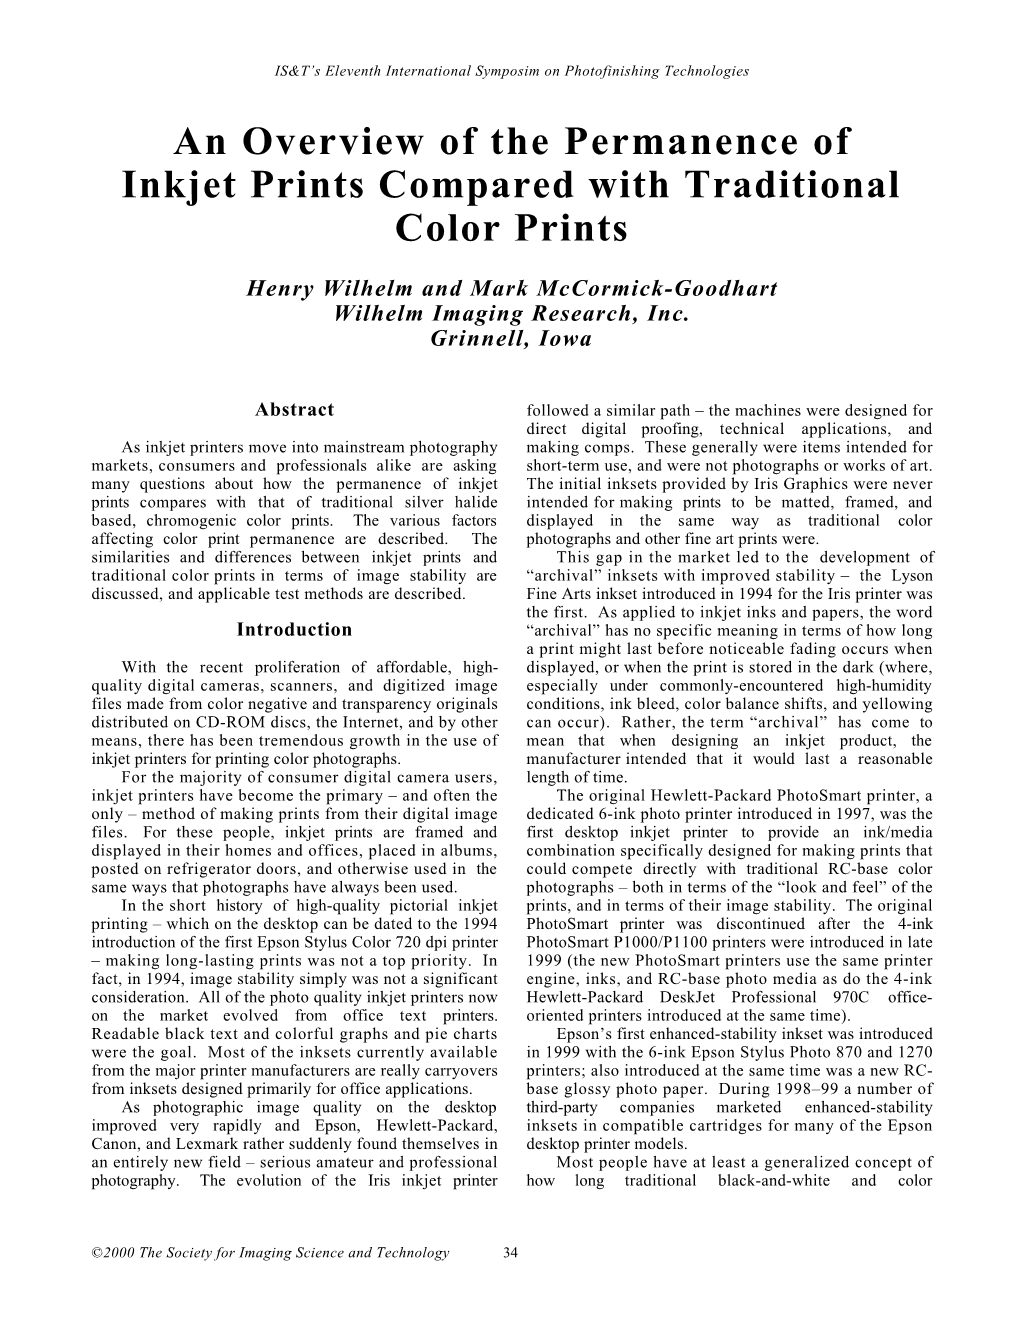 An Overview of the Permanence of Inkjet Prints Compared with Traditional Color Prints